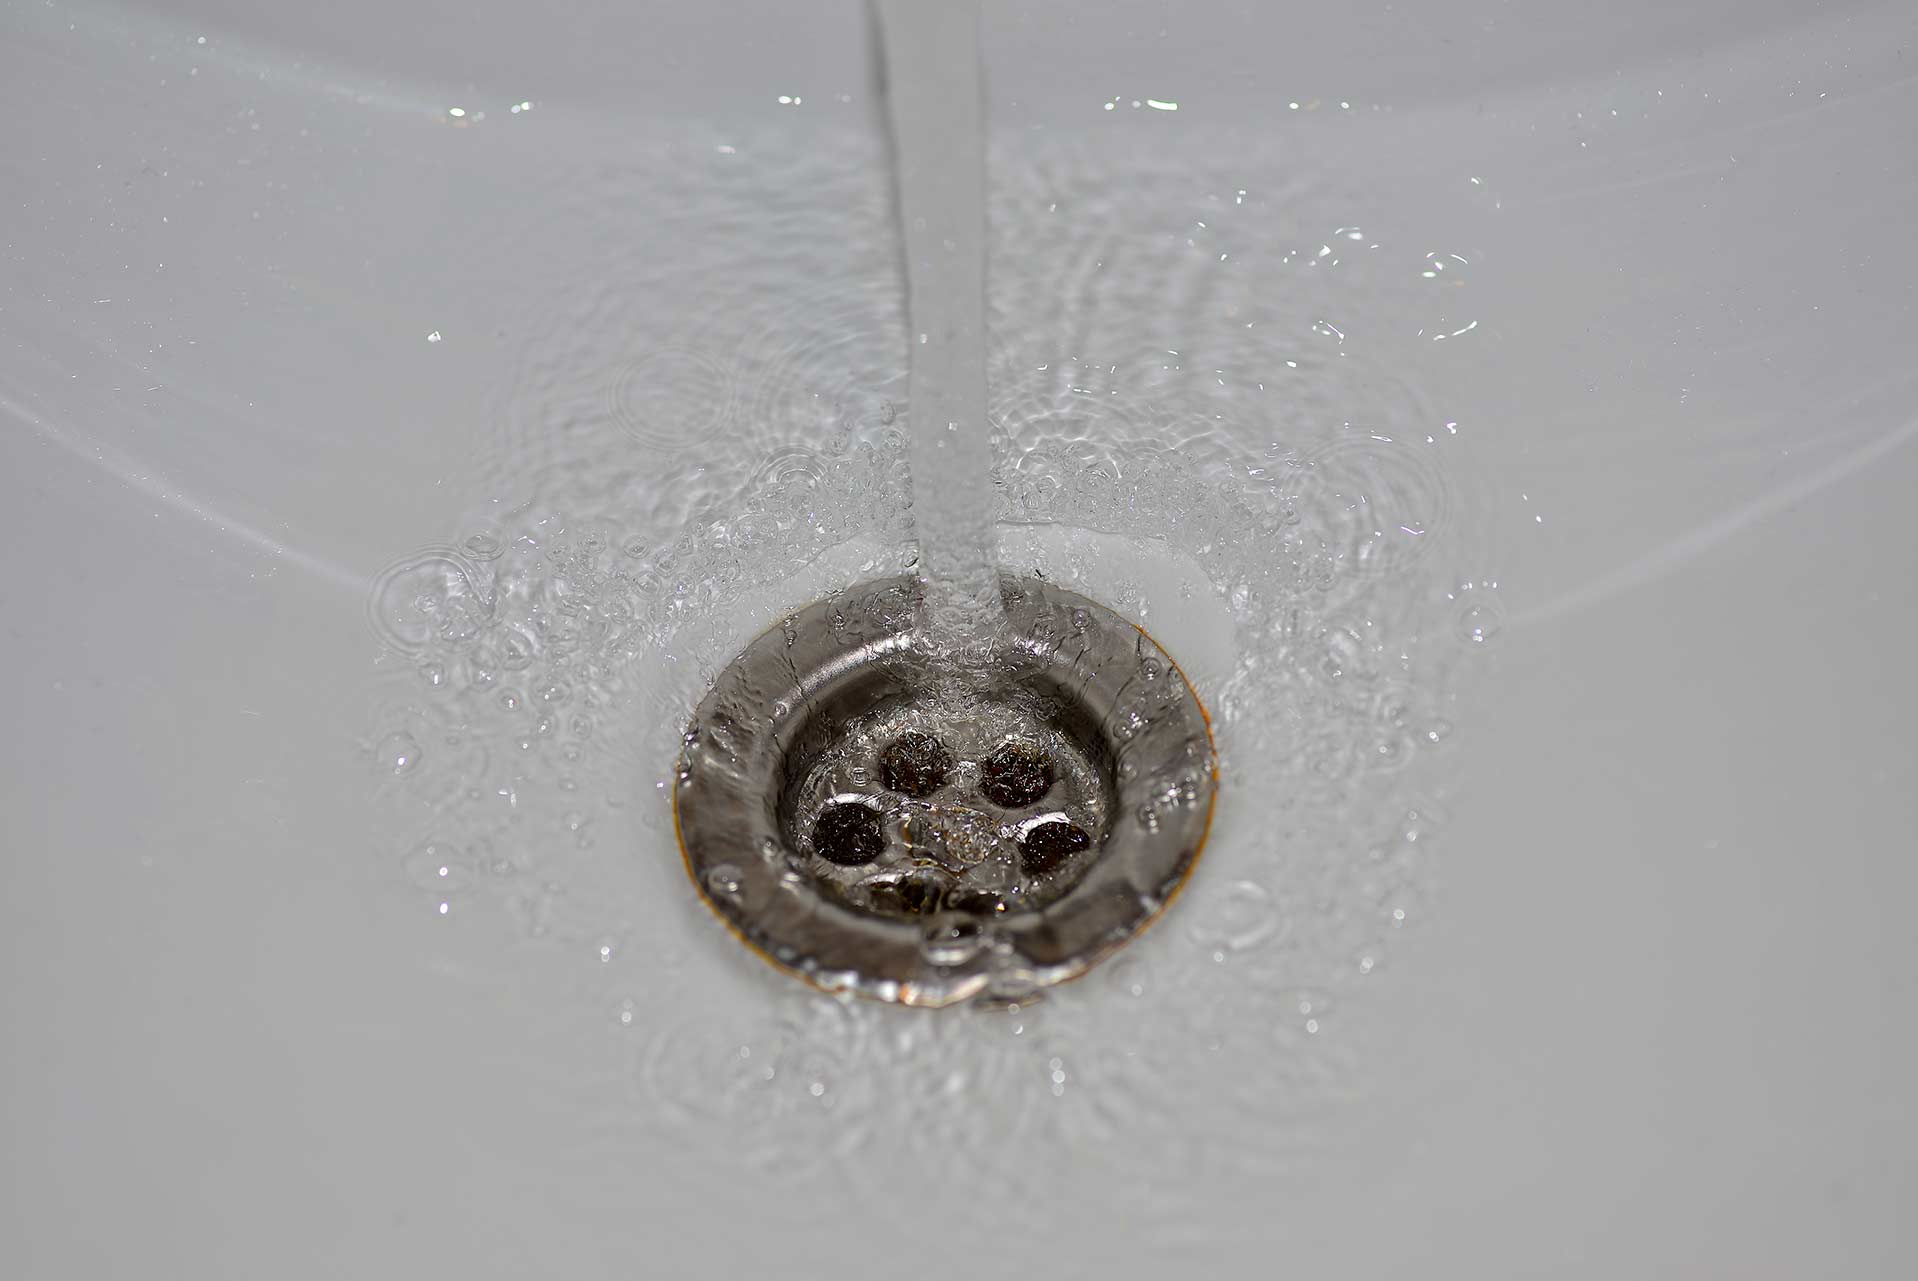 A2B Drains provides services to unblock blocked sinks and drains for properties in Hertsmere.